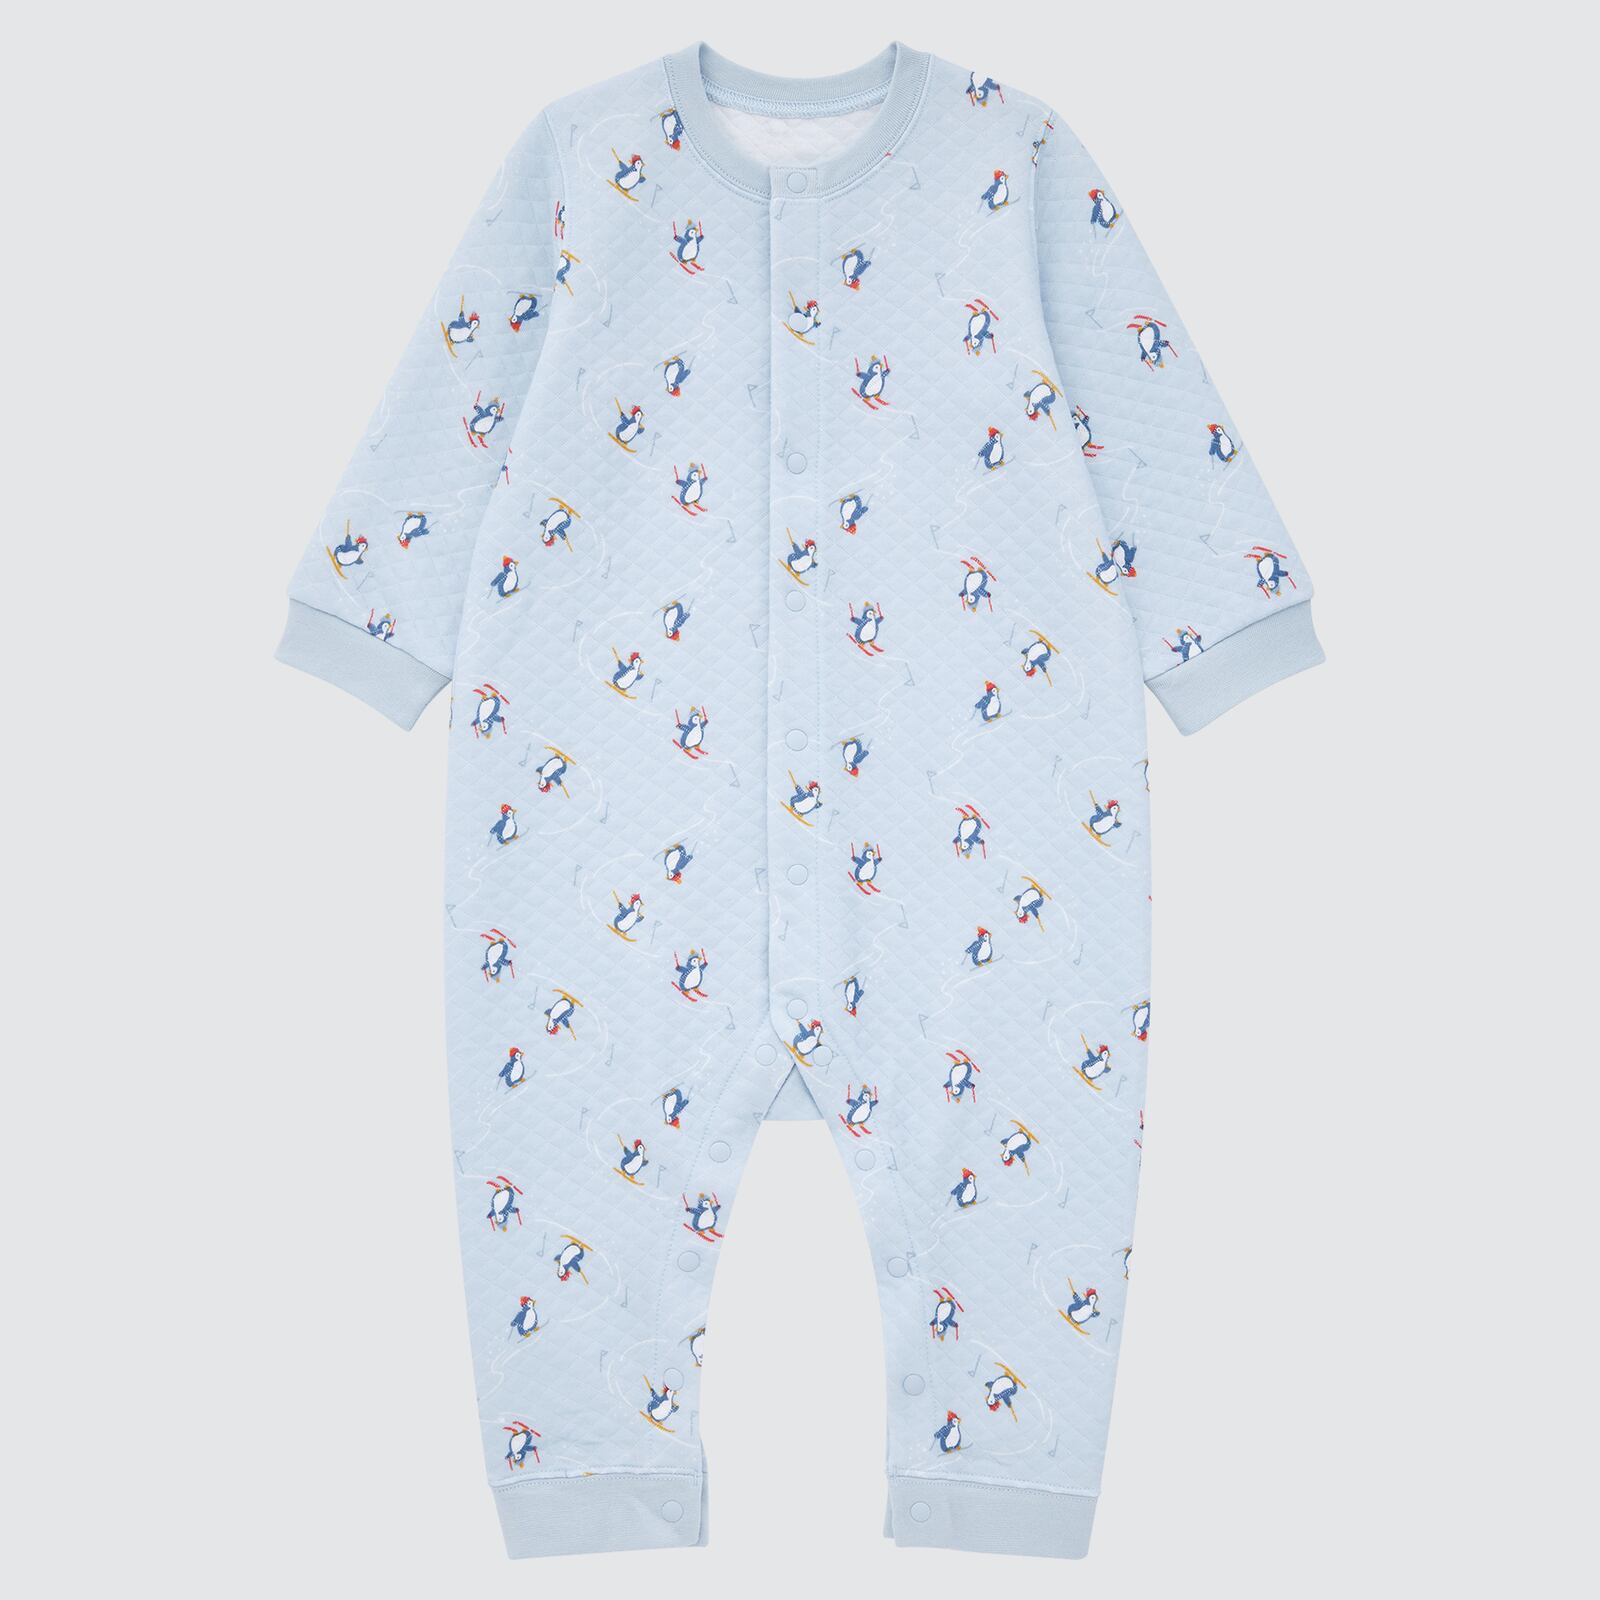 Babies Newborn Joy Of Print Quilted One Piece Outfit Uniqlo In